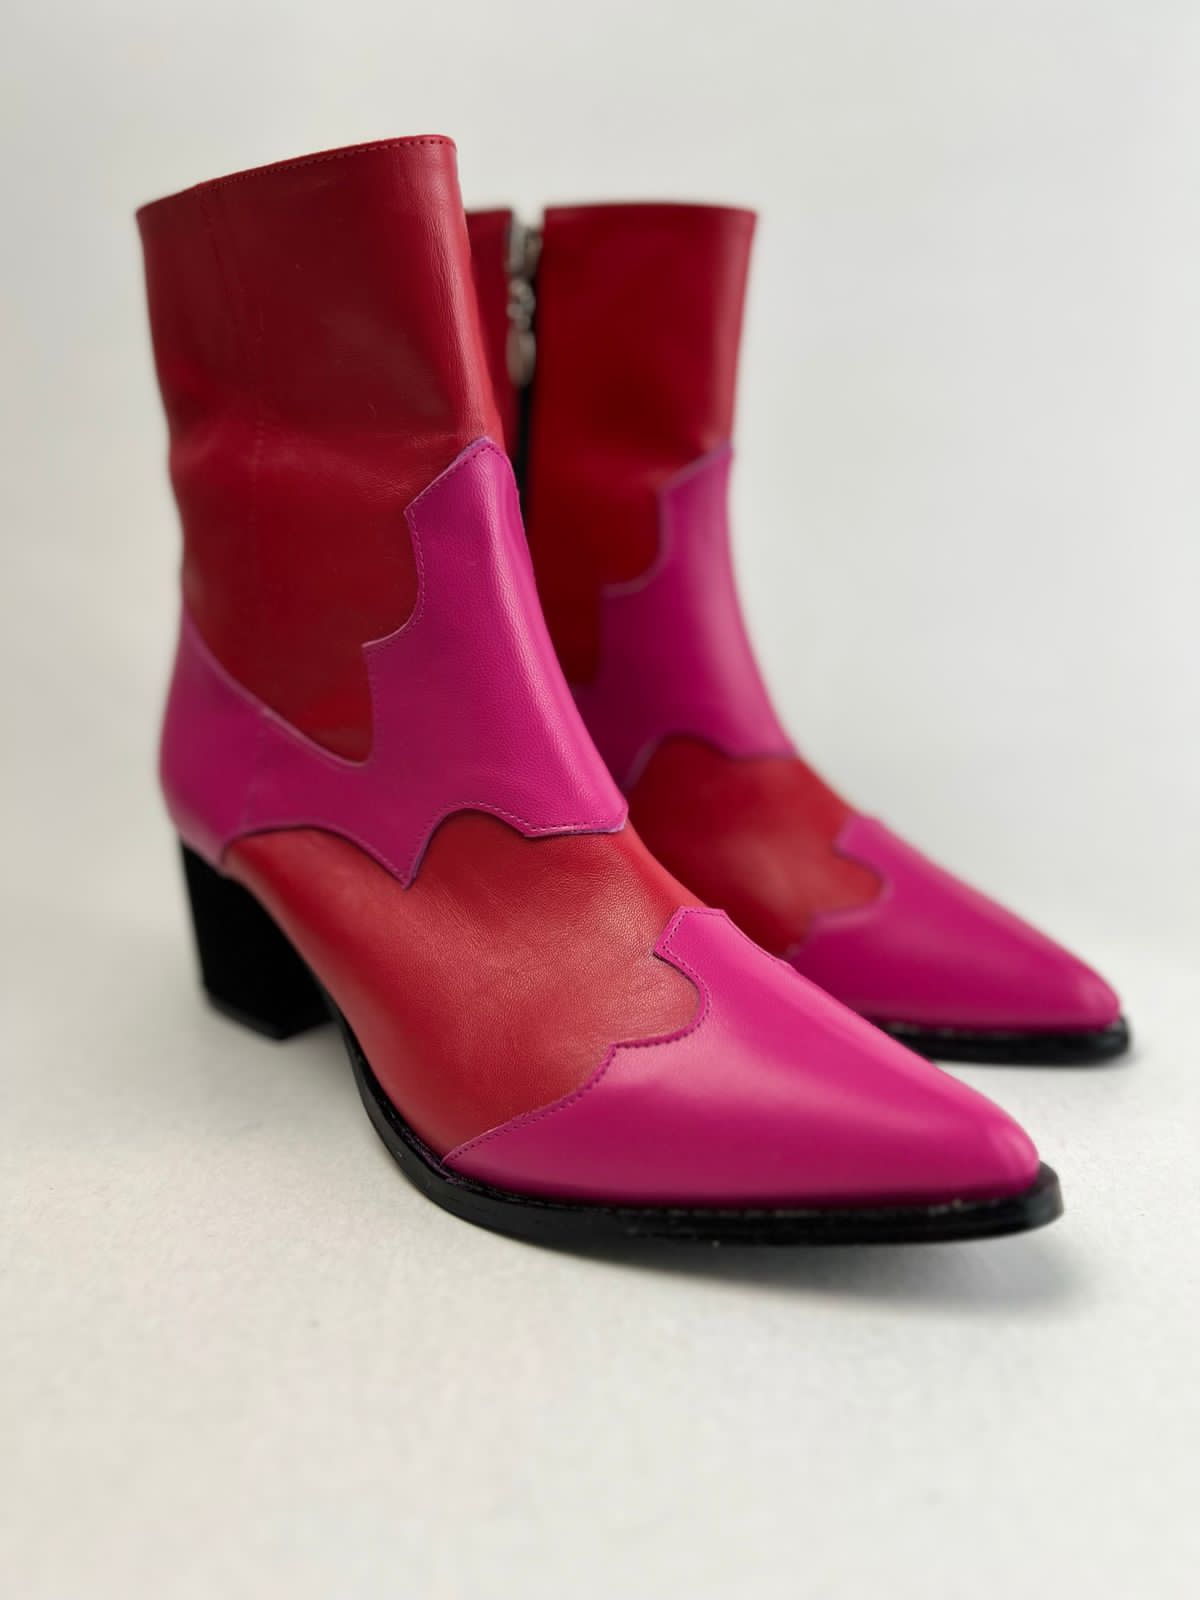 Cowboy boots pink red